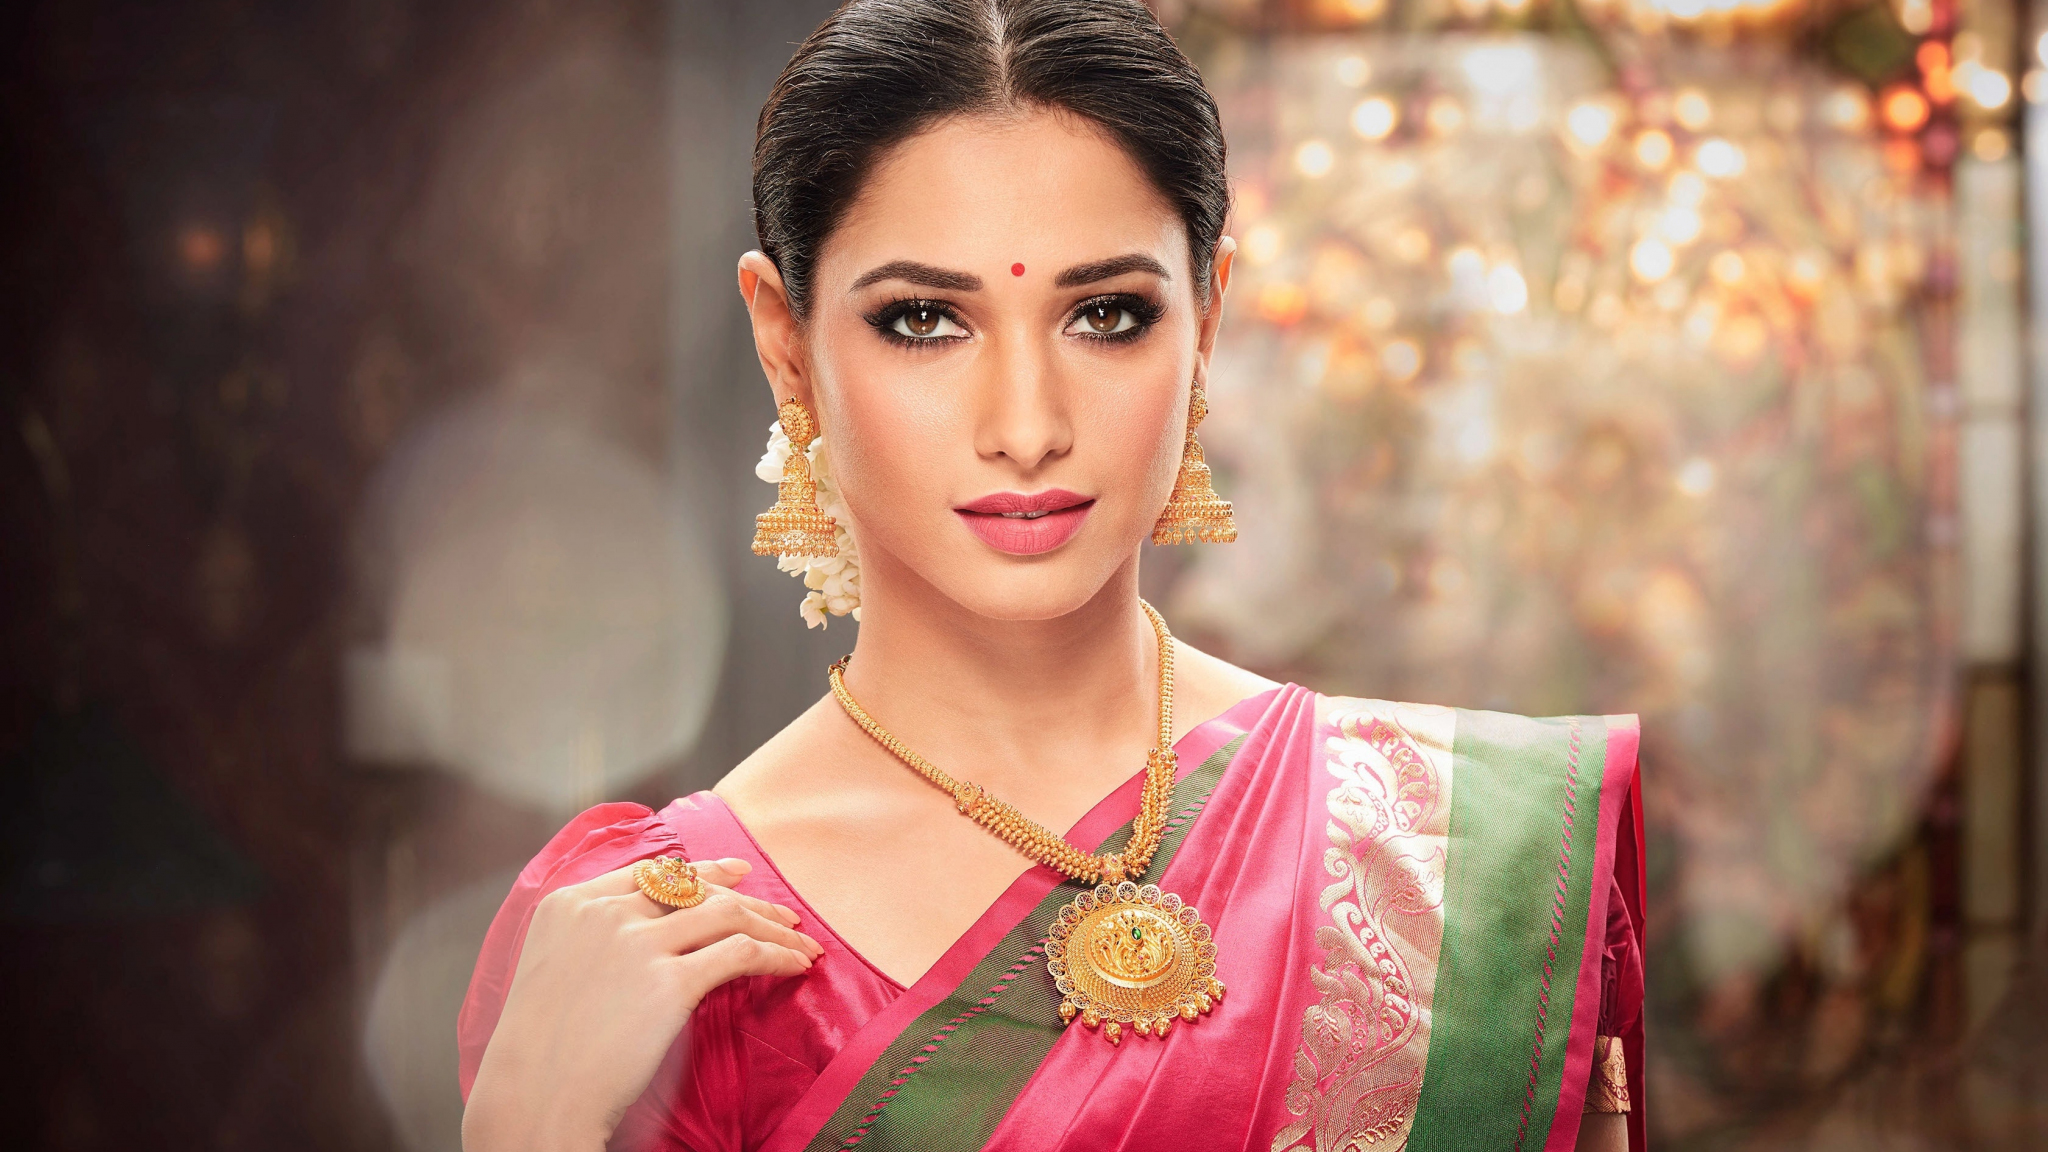 Download wallpaper x tamanna actress traditional outfit indian sarree dual wide x hd background